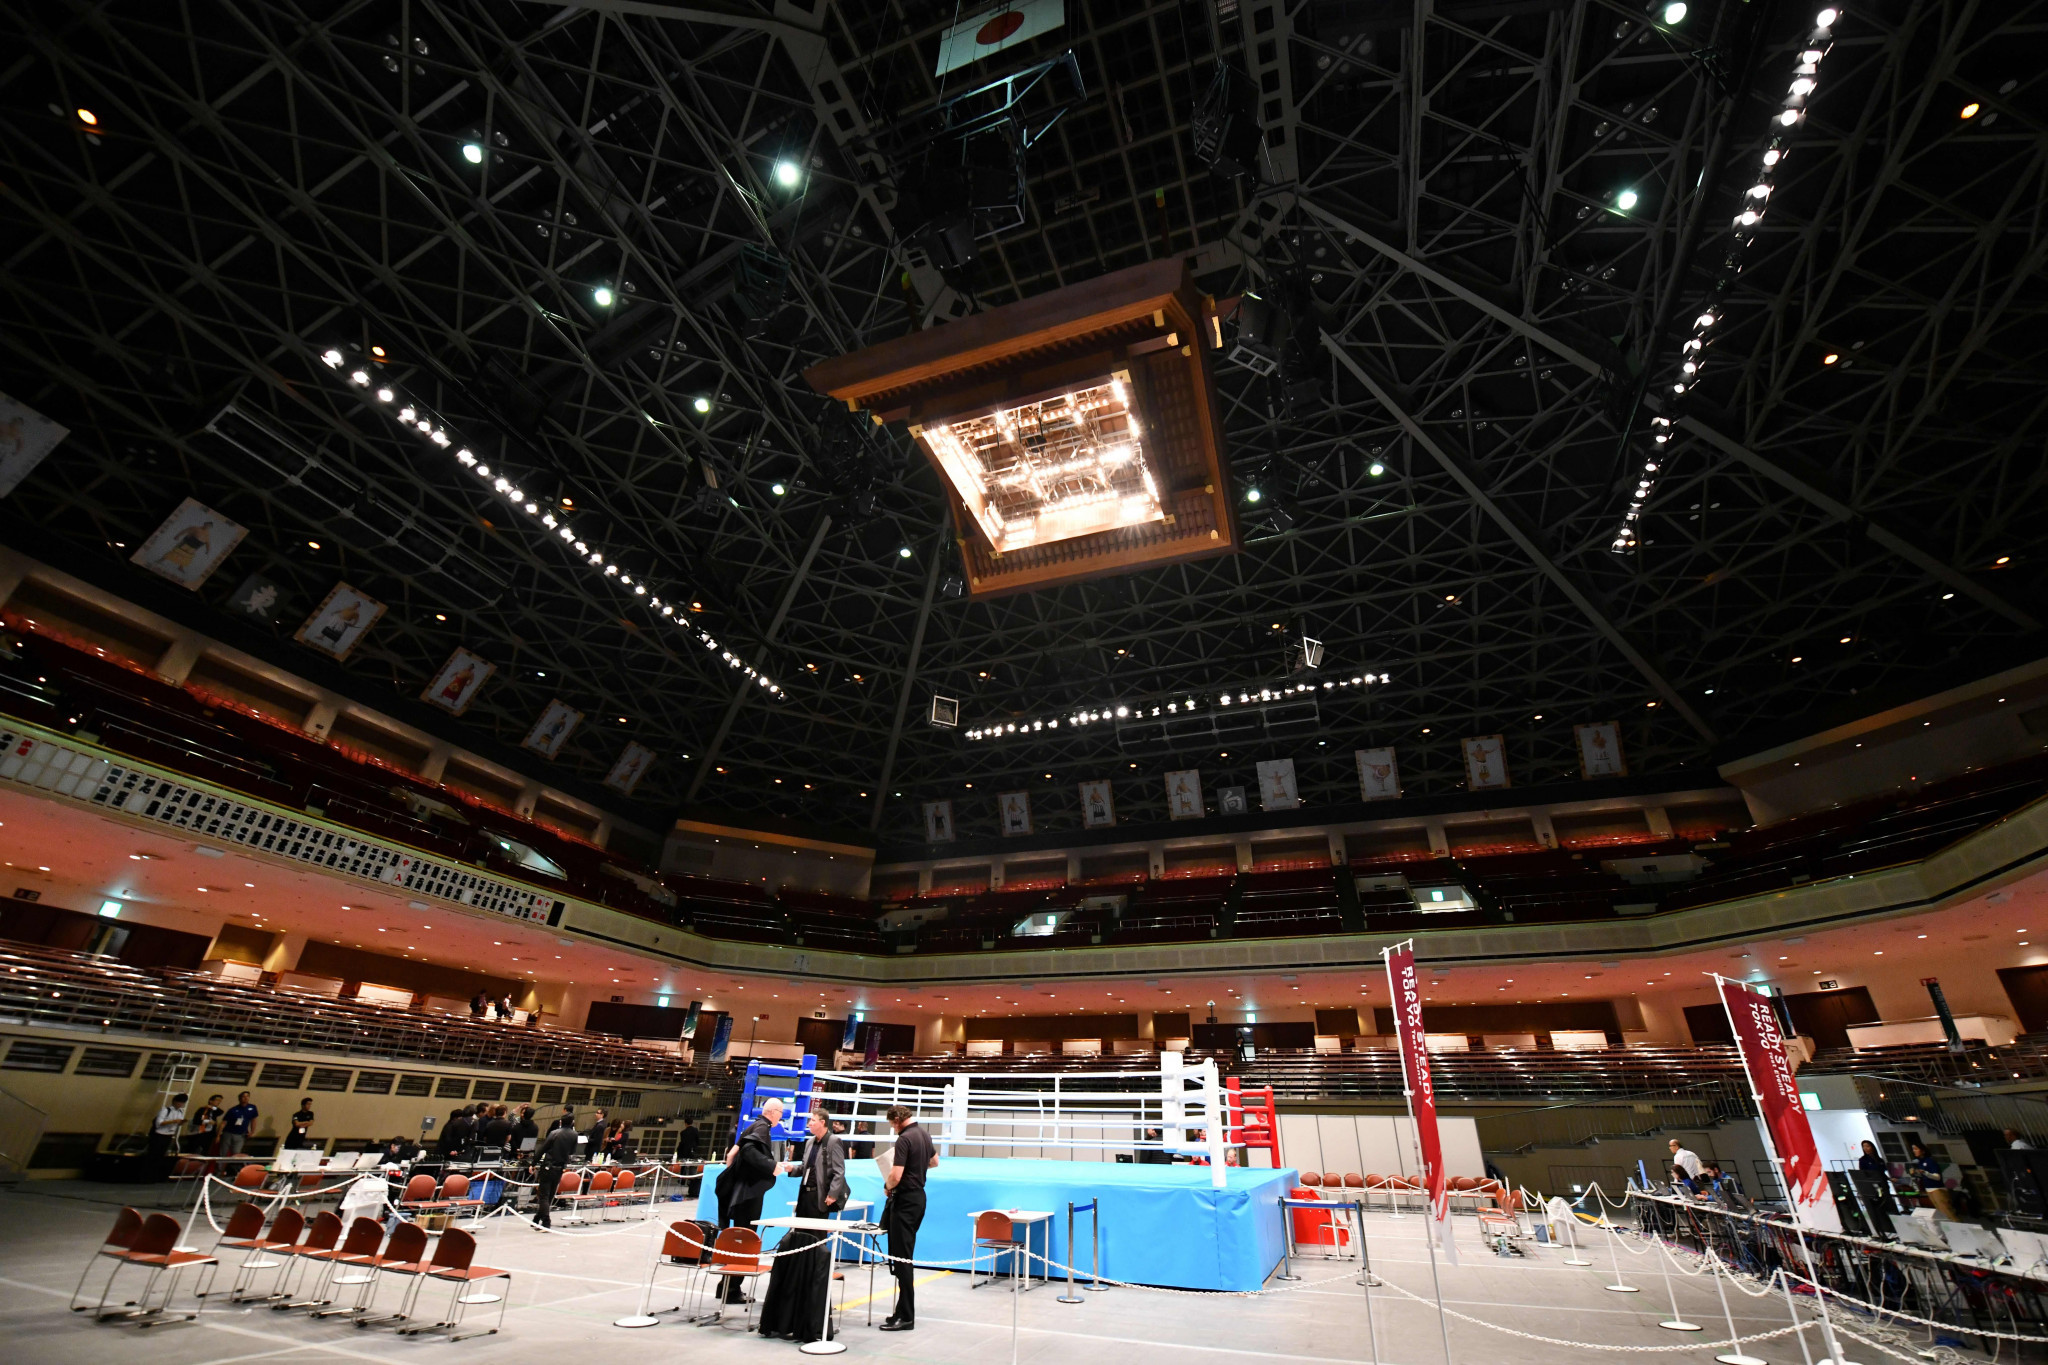 The Ryōgoku Kokugikan sumo venue will be used for boxing at Tokyo 2020 ©Getty Images